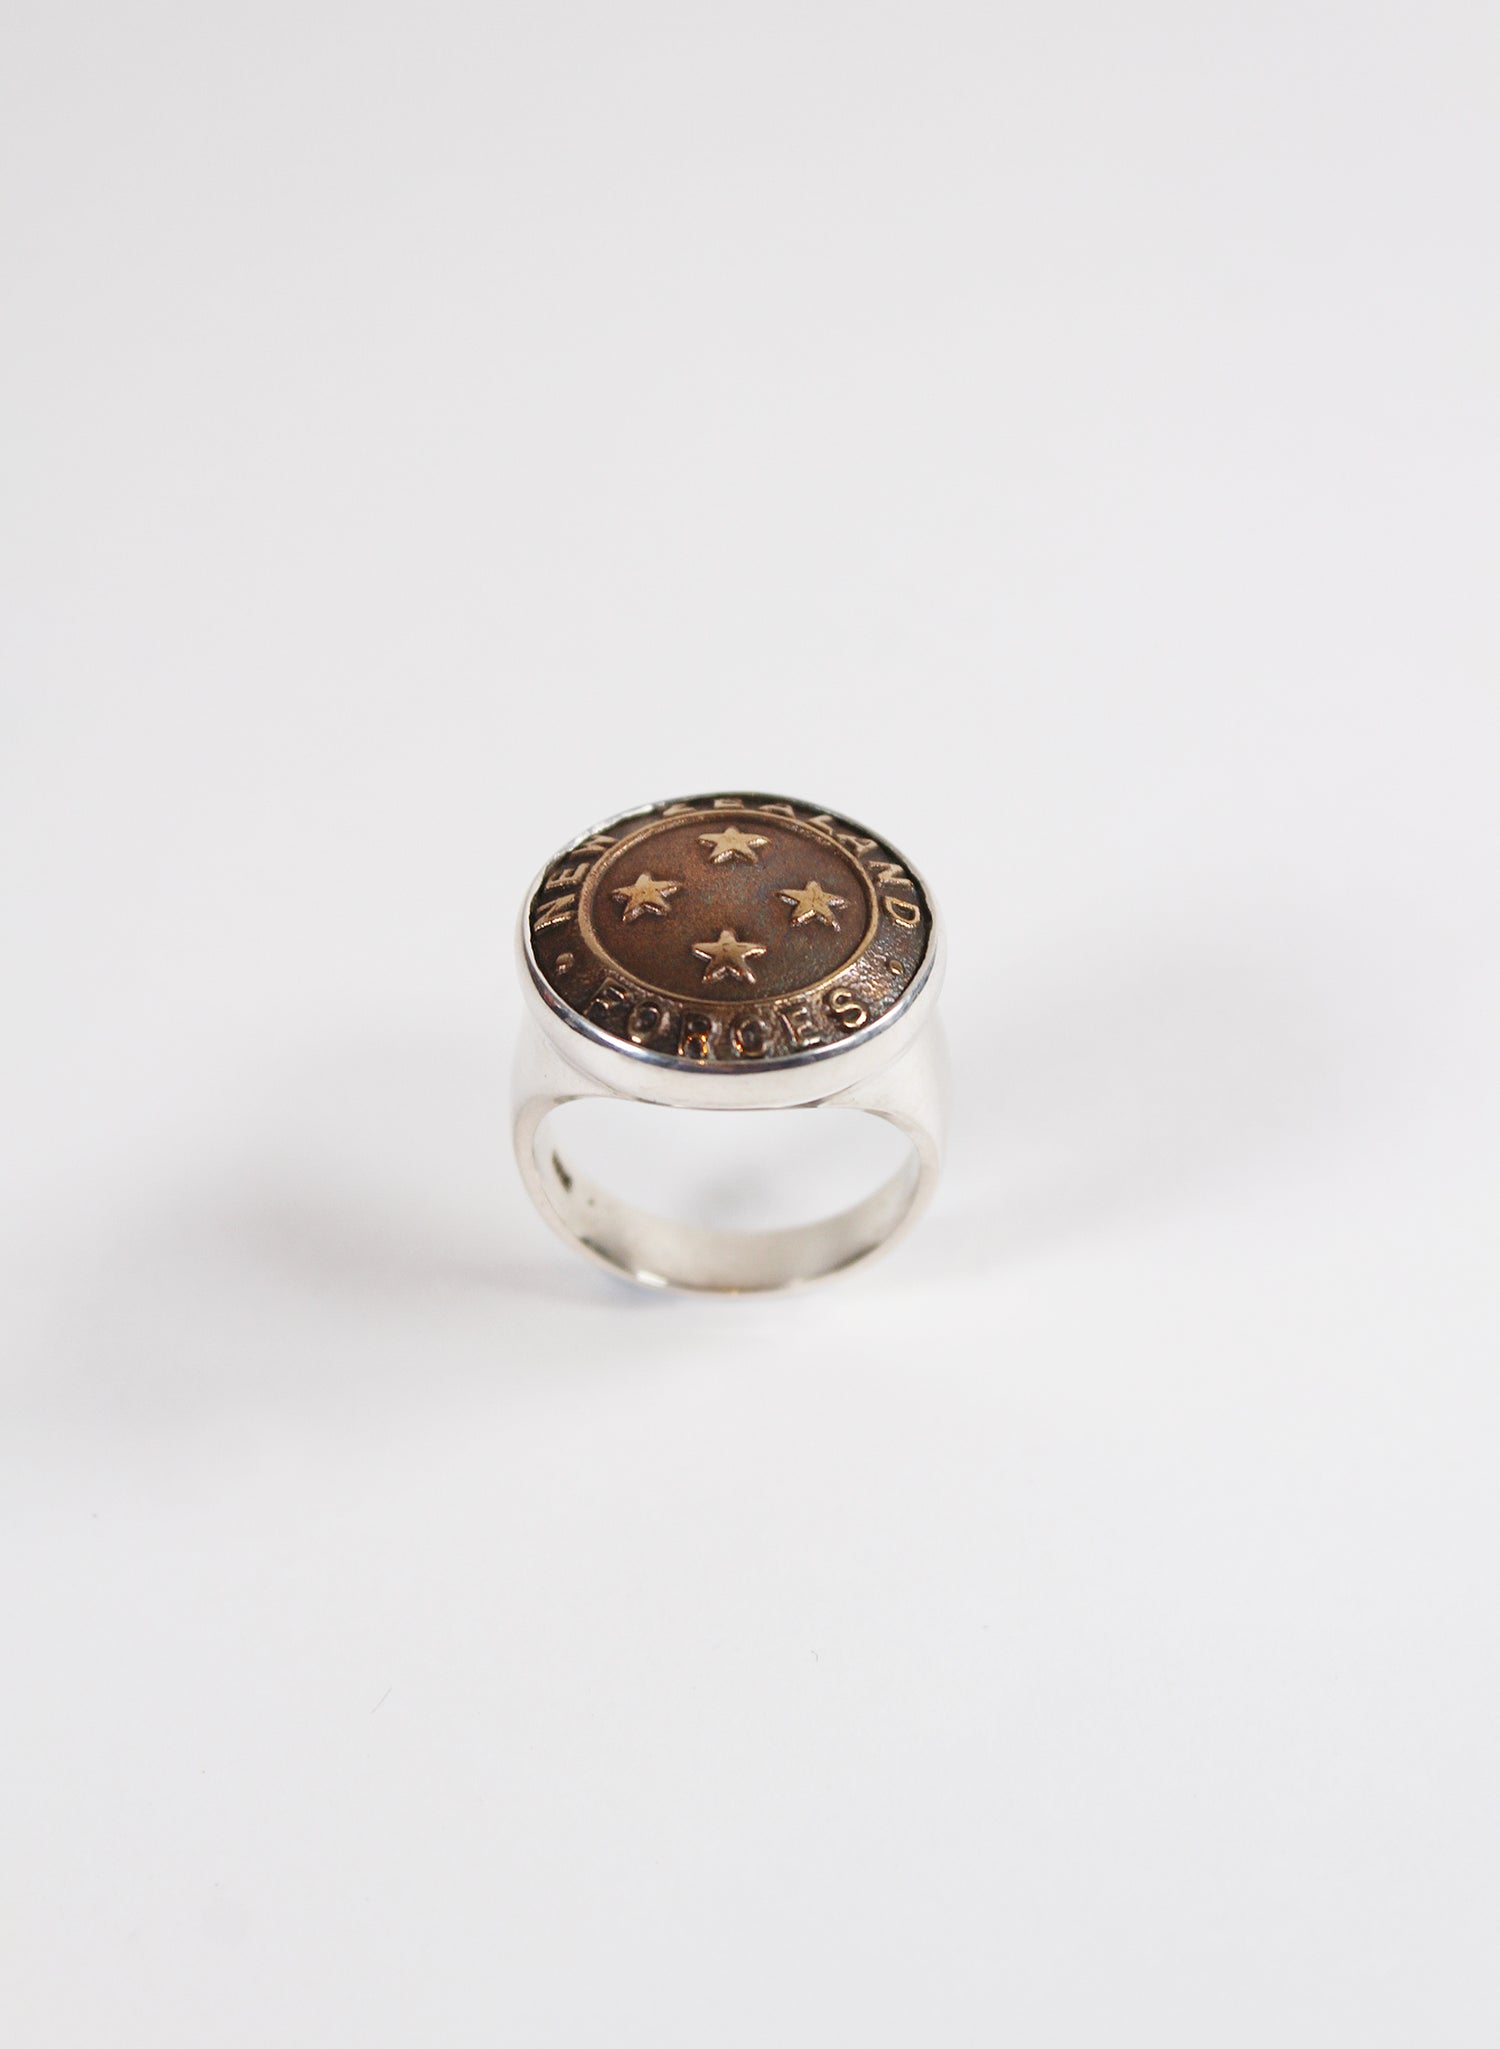 NZ Forces Signet Ring - Bronze &amp; Sterling Silver Ring (Medium)